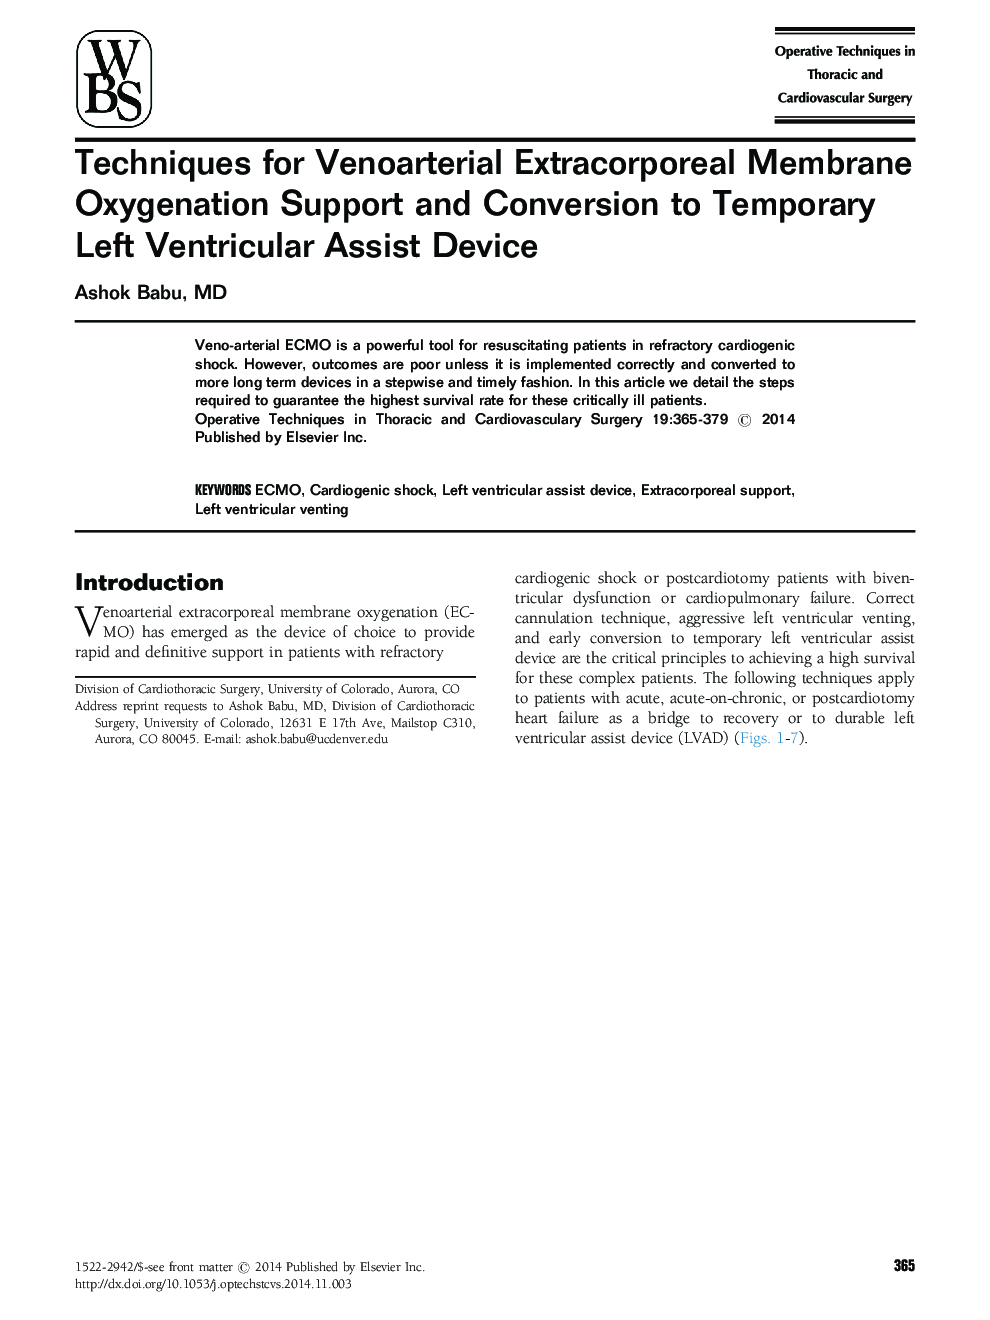 Techniques for Venoarterial Extracorporeal Membrane Oxygenation Support and Conversion to Temporary Left Ventricular Assist Device